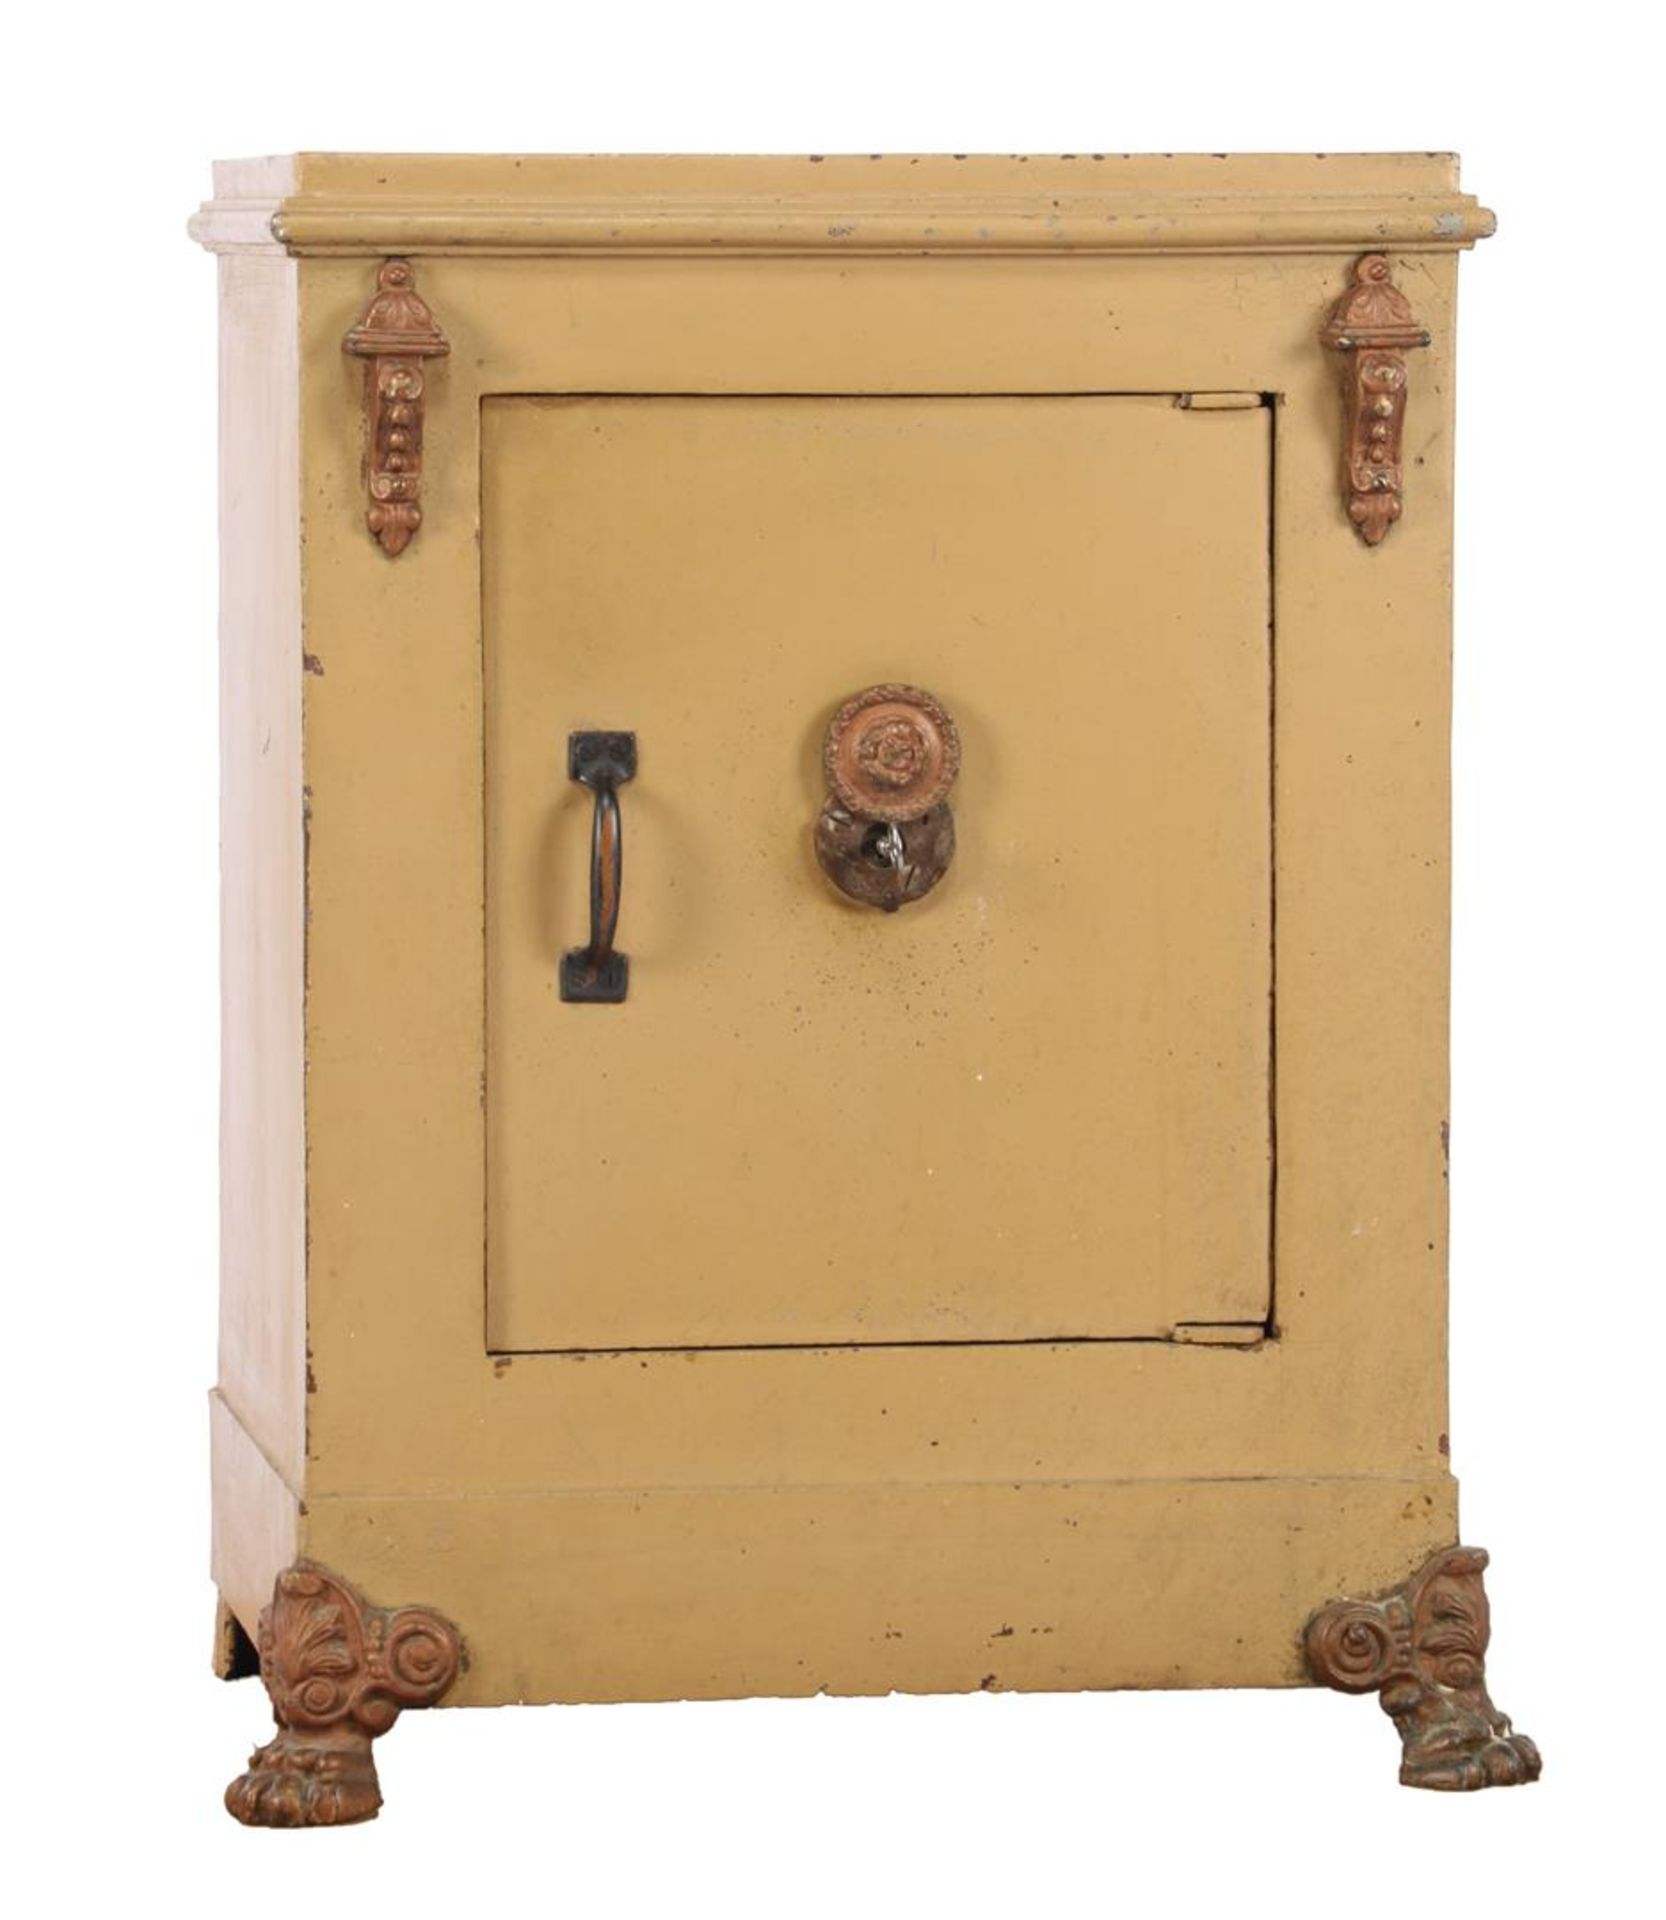 Antique safe with key, standing on claw feet 79 cm high, 59 cm wide, 45.5 cm deep